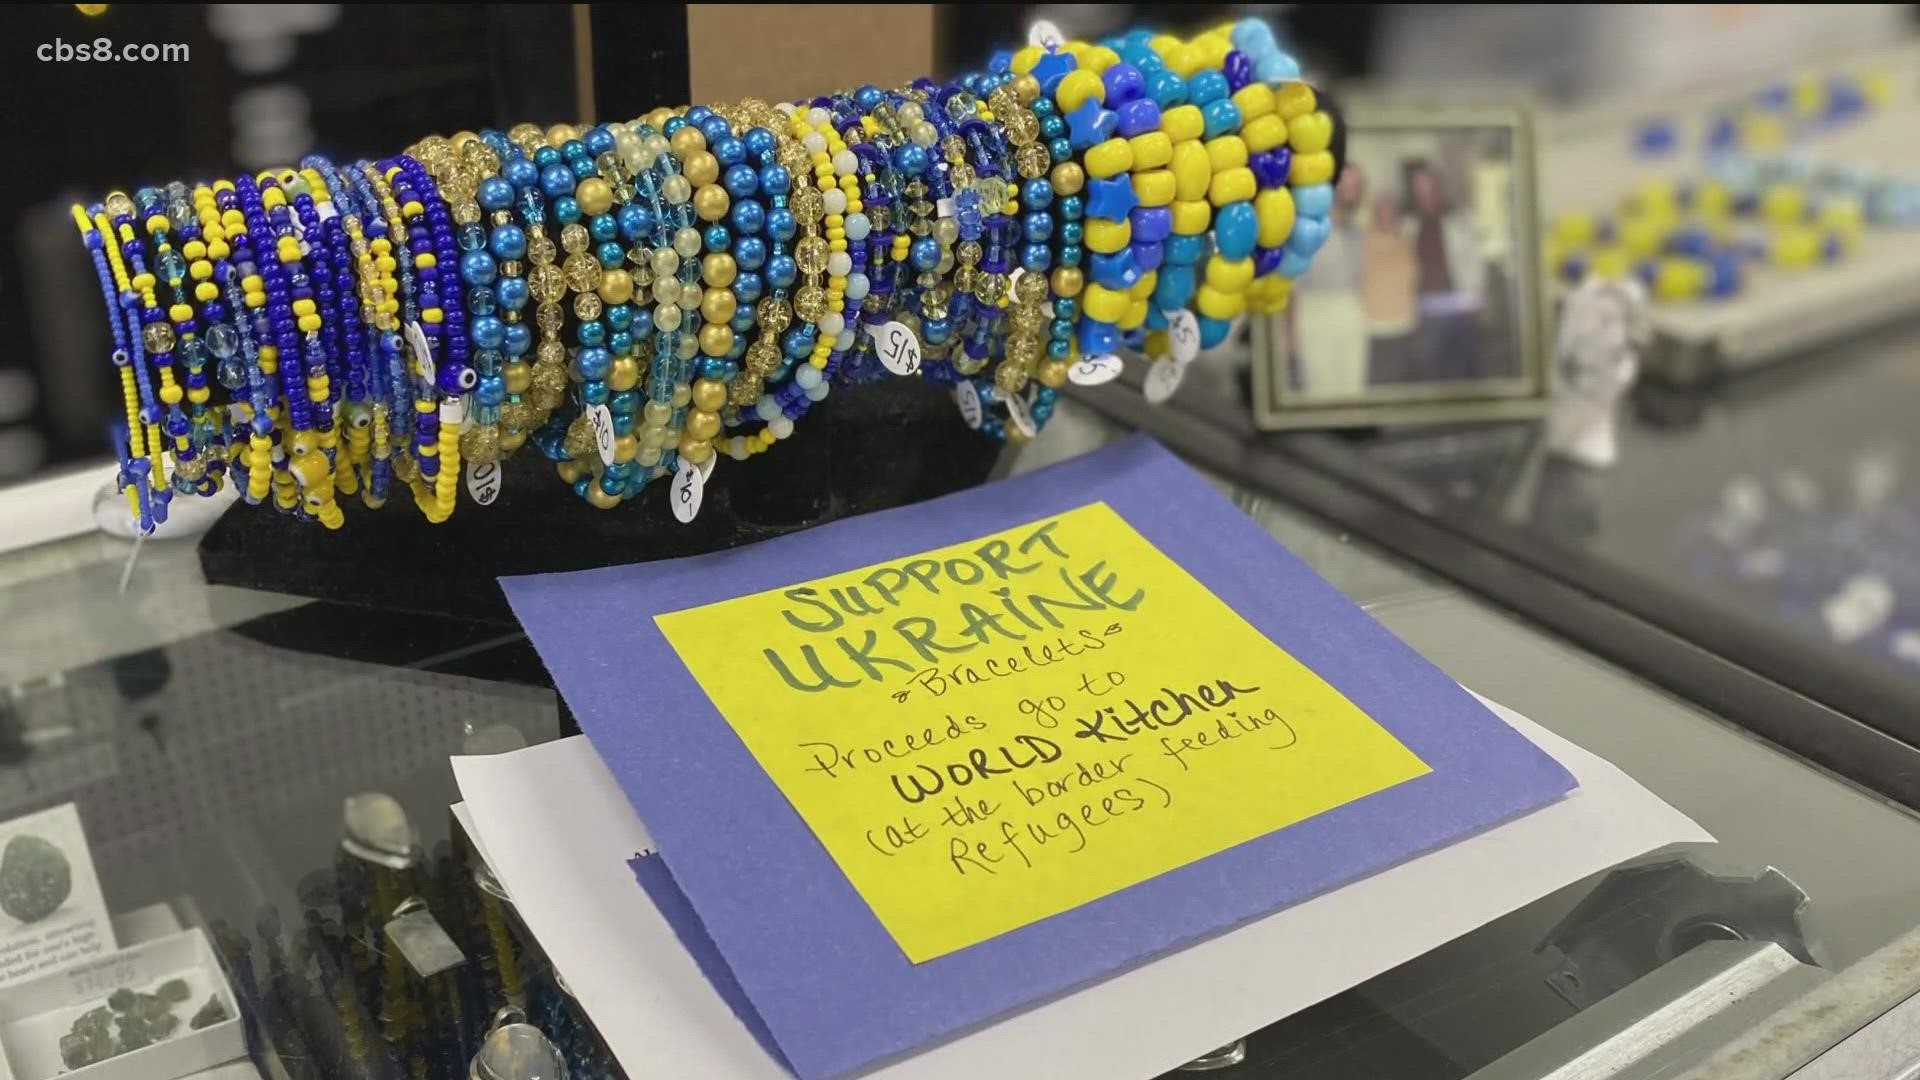 100% of jewelry proceeds are helping the people in Ukraine.